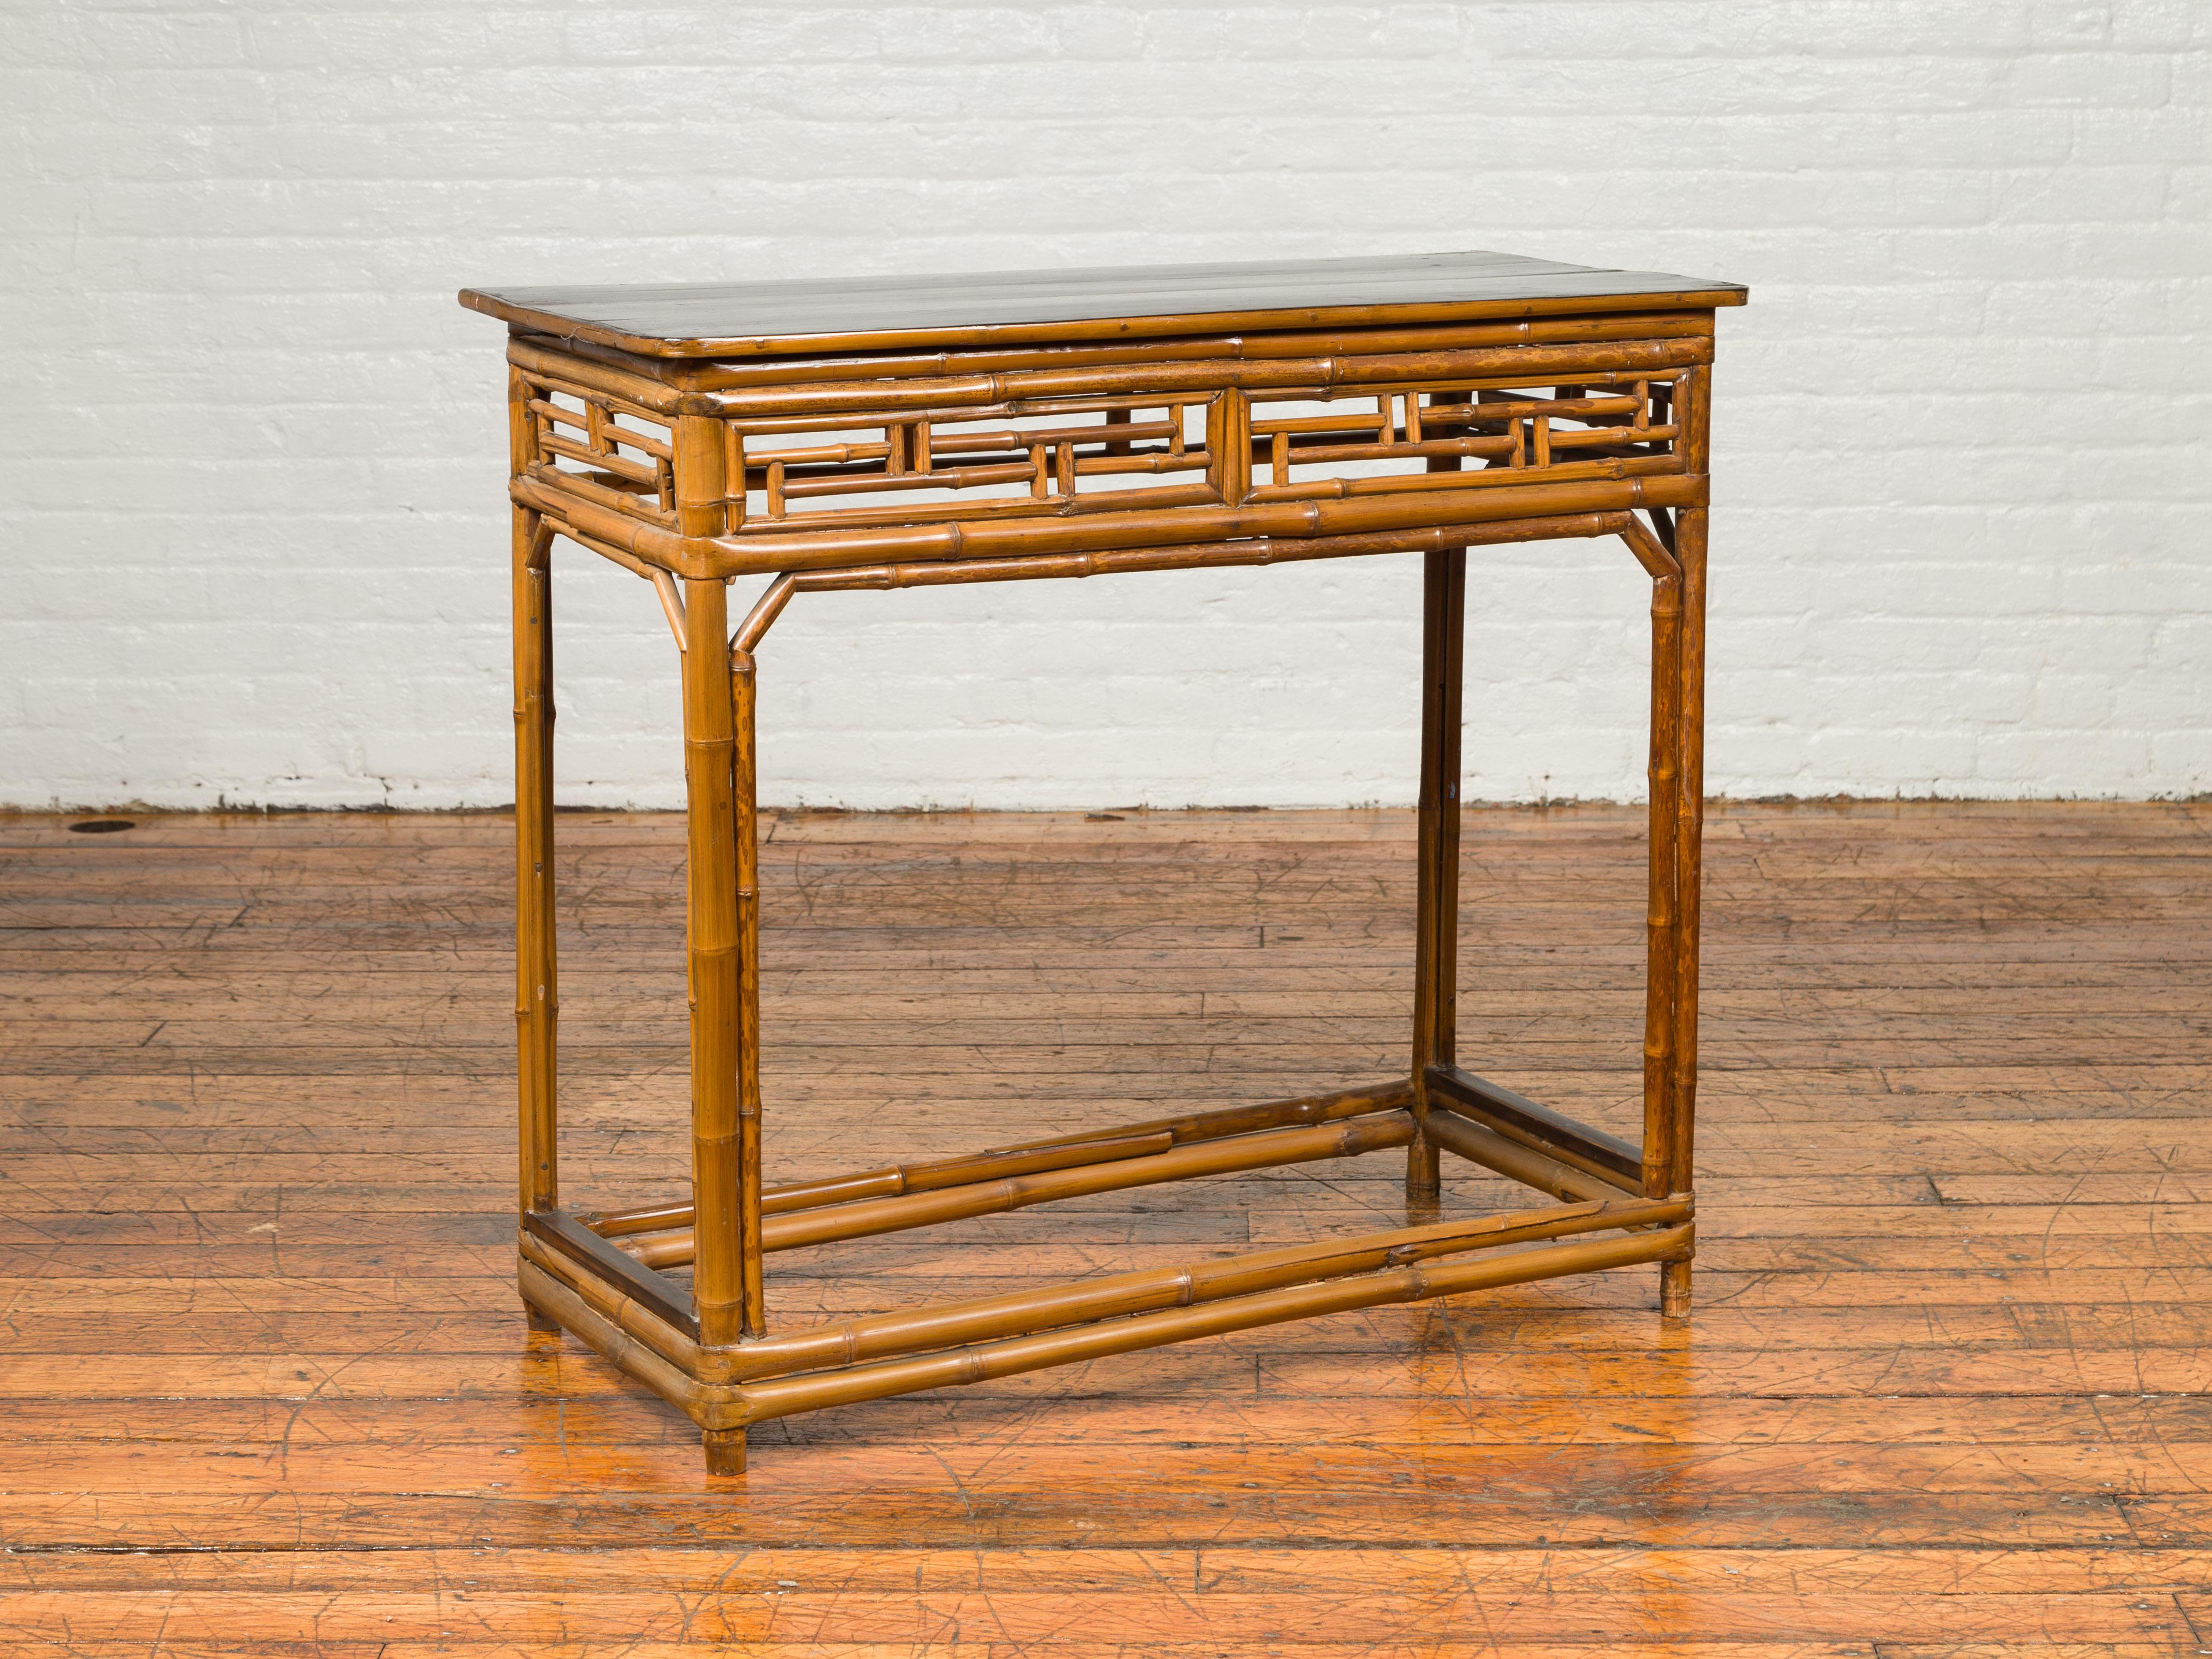 Lacquered Chinese Qing Dynasty Bamboo Altar Console Table with Geometric Patterns